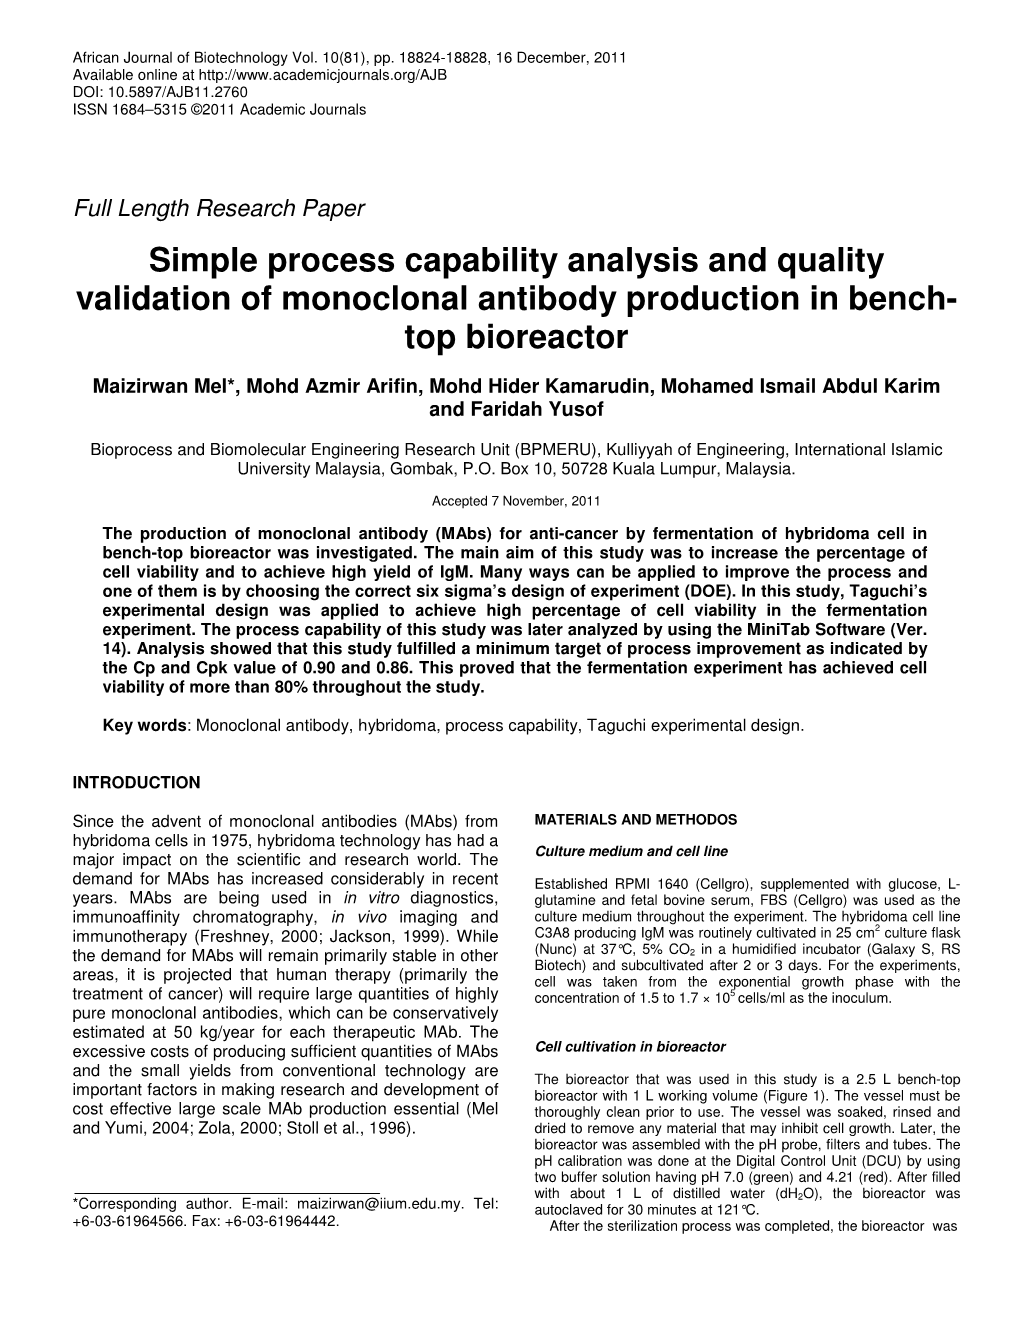 Simple Process Capability Analysis and Quality Validation of Monoclonal Antibody Production in Bench- Top Bioreactor